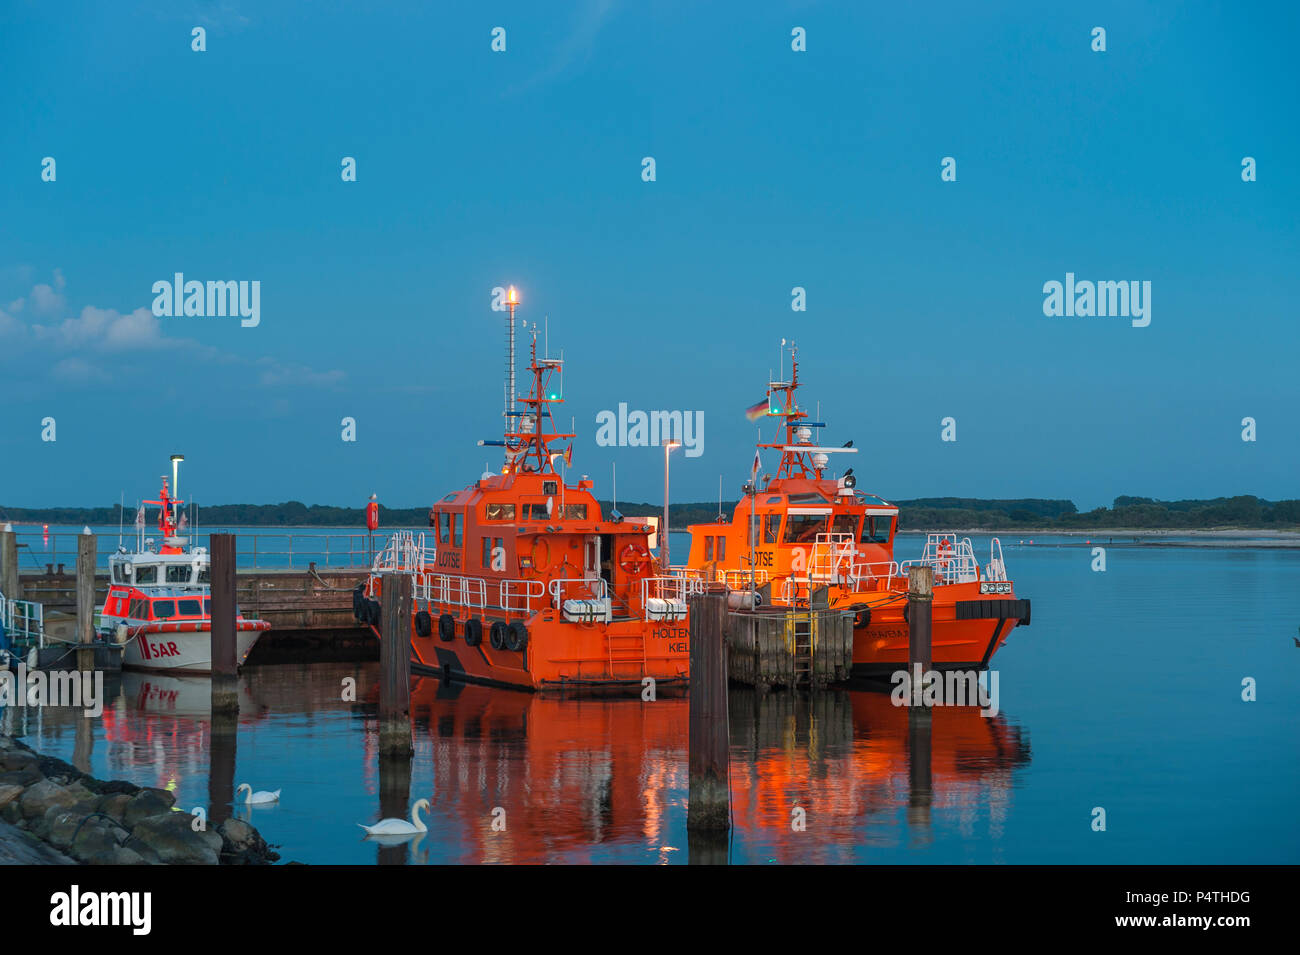 Pilot boats in the mouth of the Trave, Travemünde, Baltic Sea, Schleswig-Holstein, Germany Stock Photo